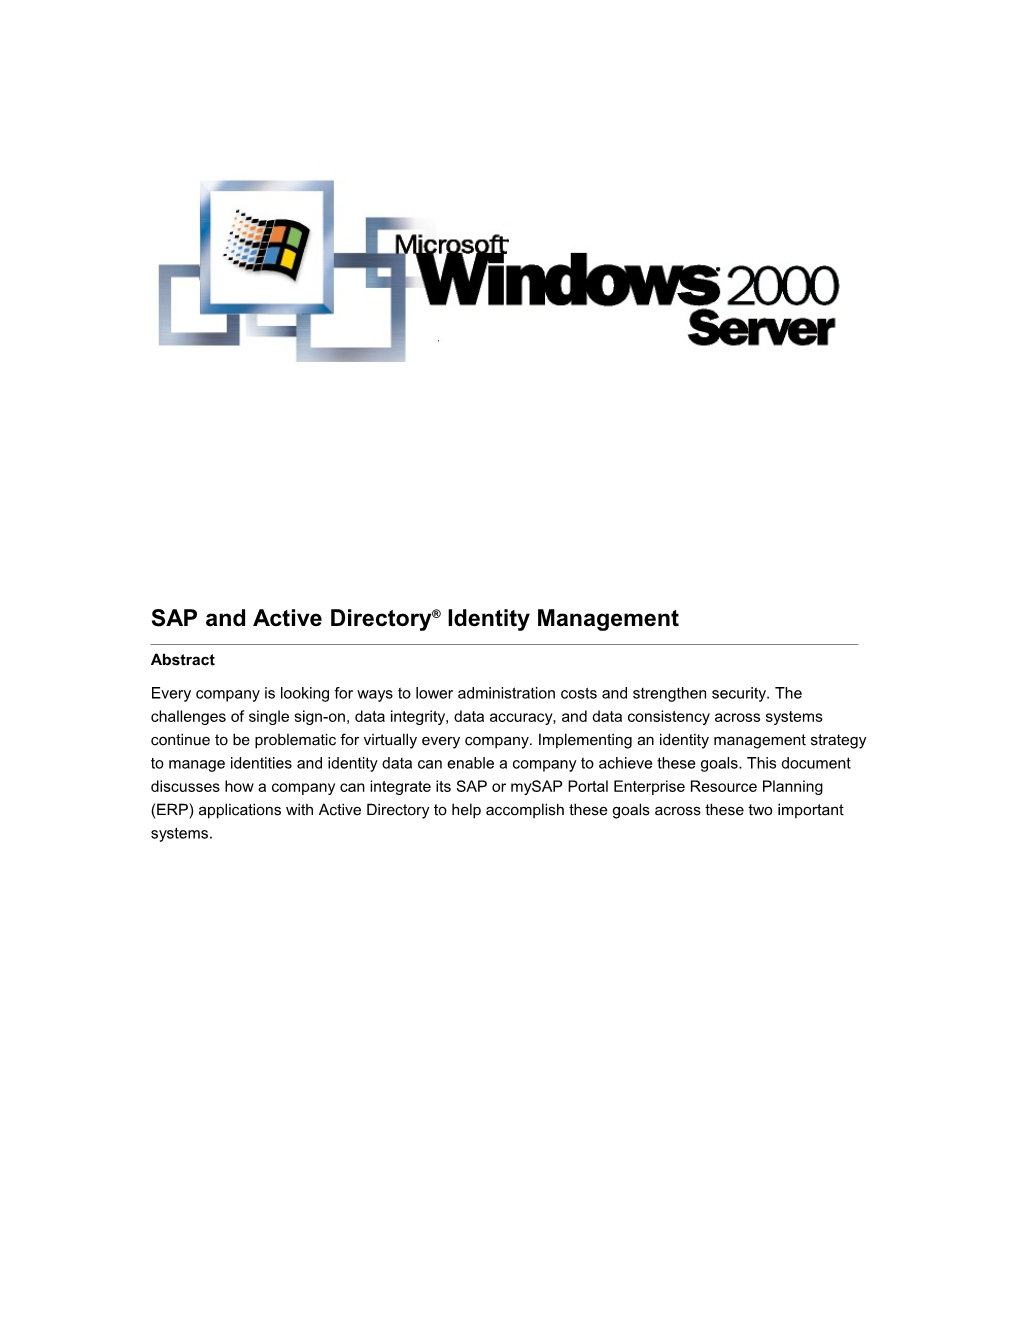 SAP and Active Directory Identity Management